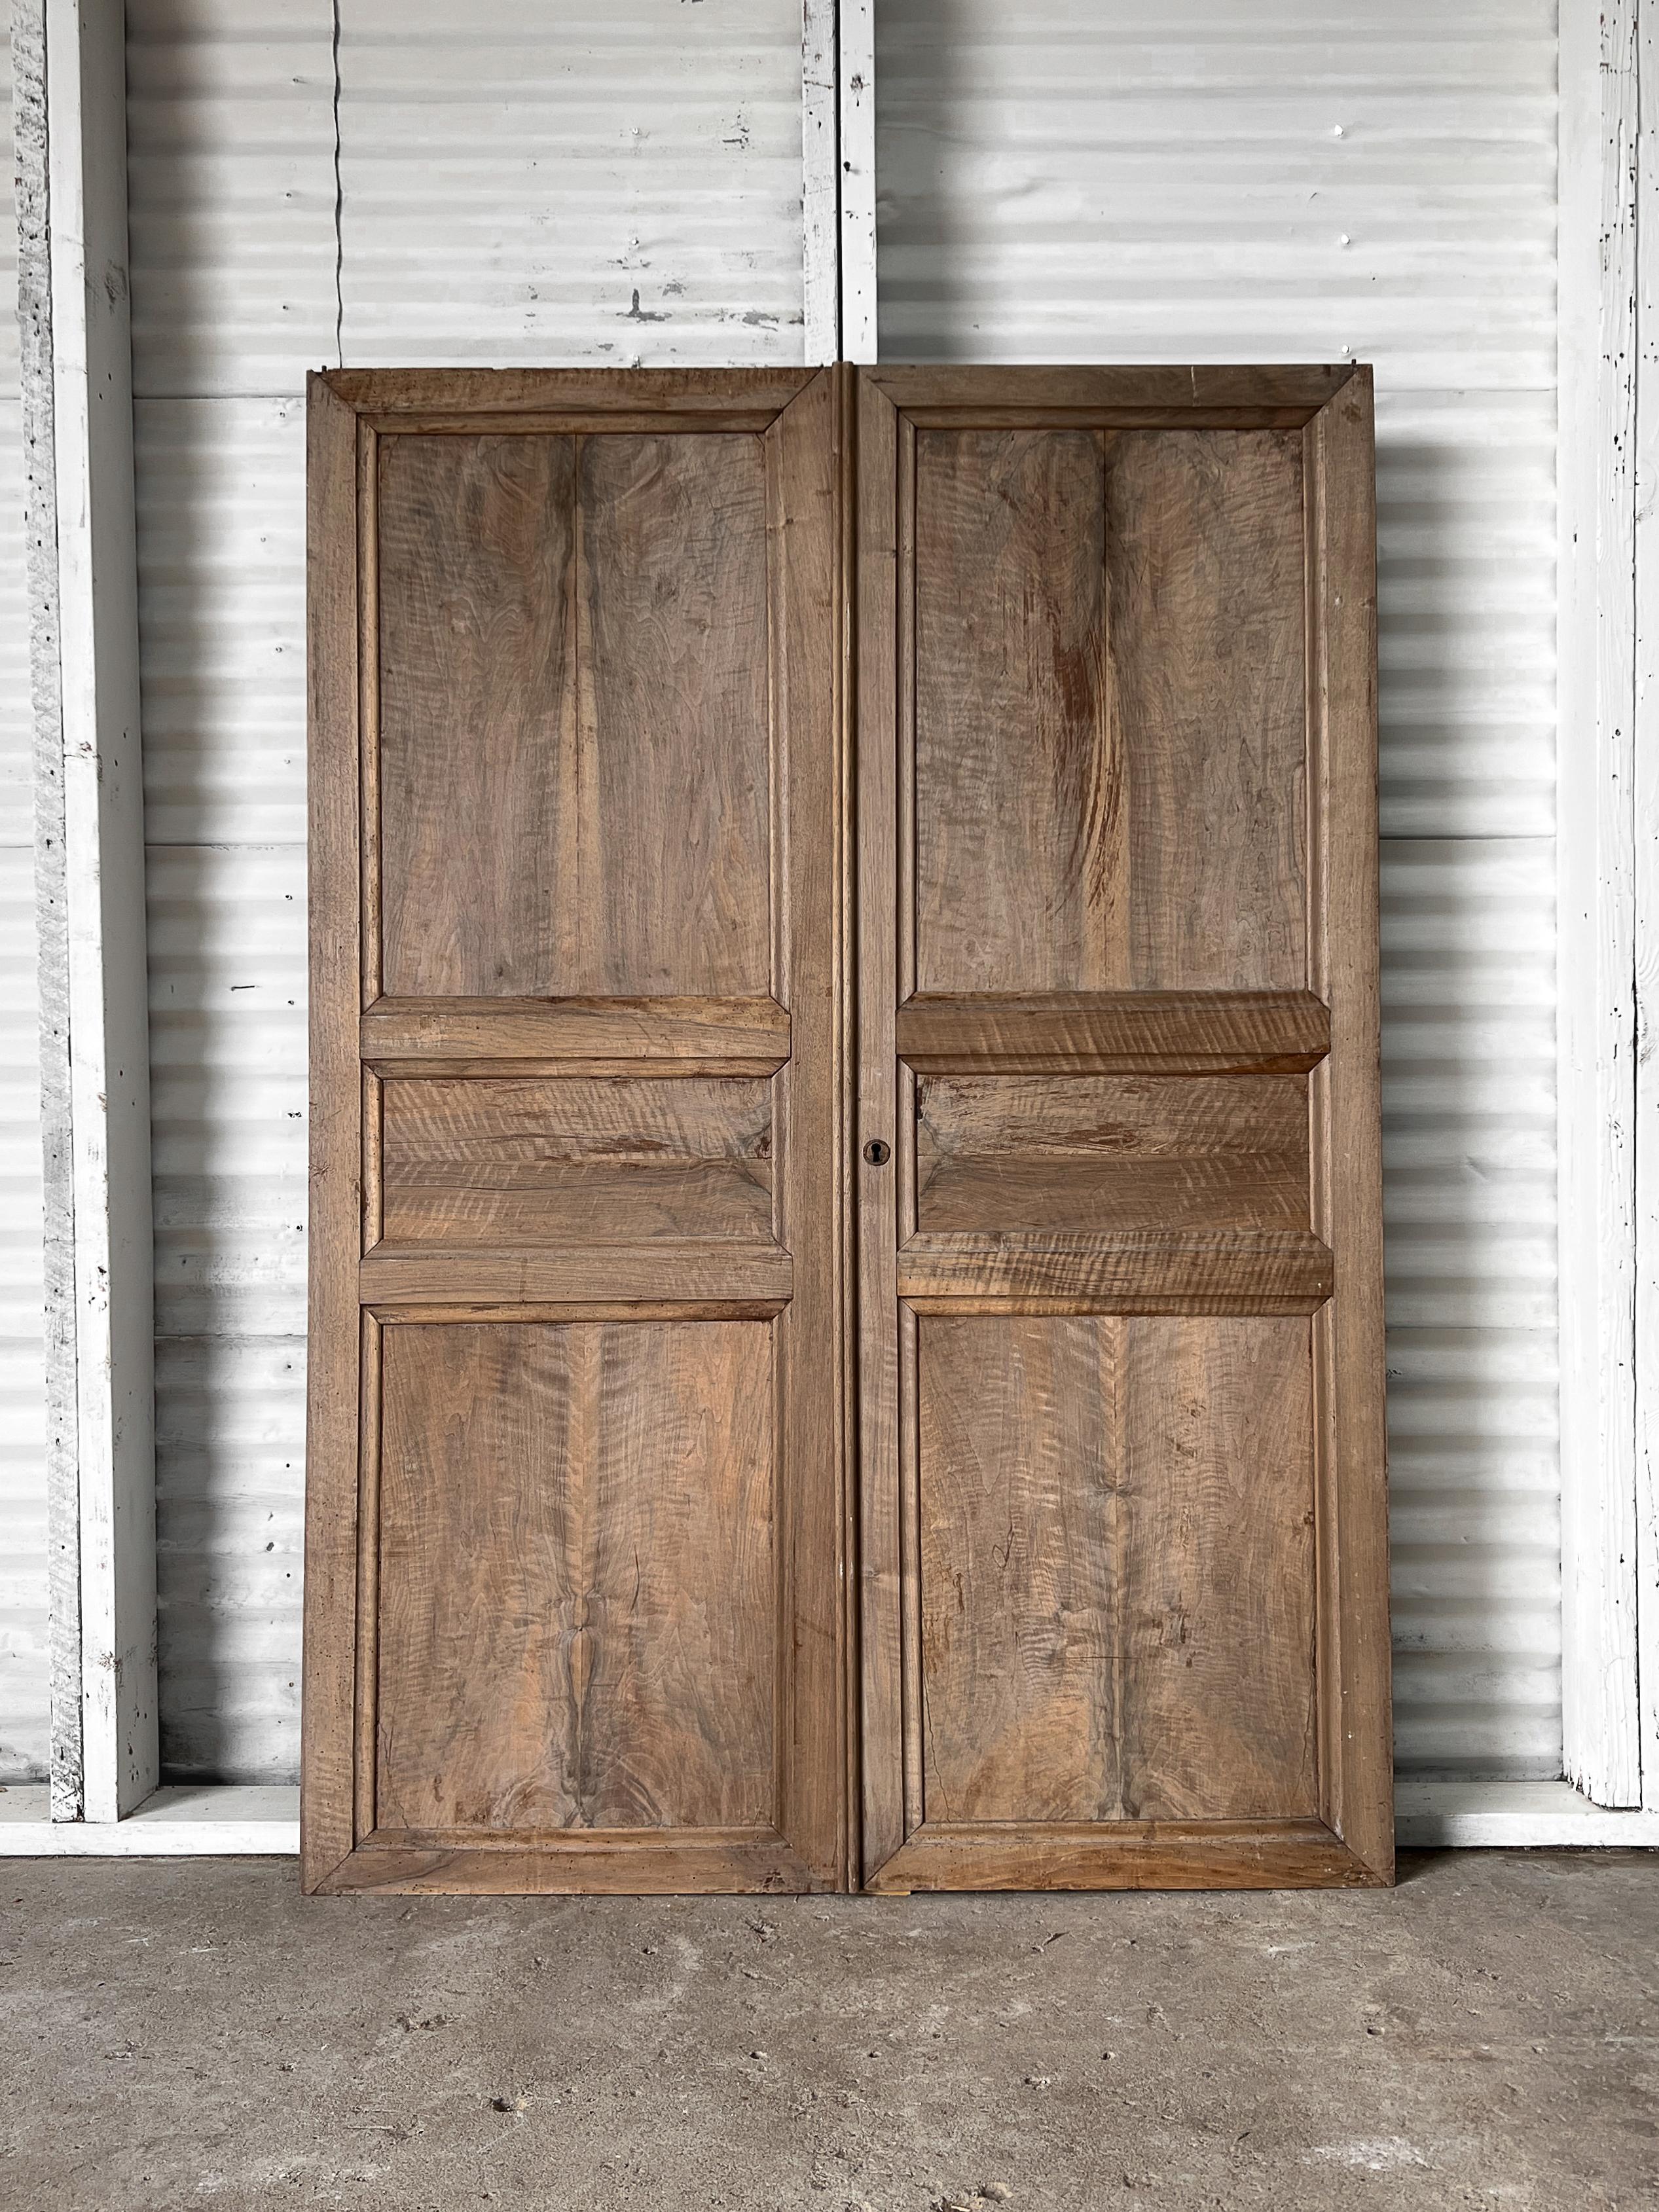 A pair of 19th-century antique French 3-panel doors with raised beveled trim details. Handcrafted from solid walnut, each panel is book-matched, giving them a sophisticated look.

The doors are fairly lightweight and would be best installed to